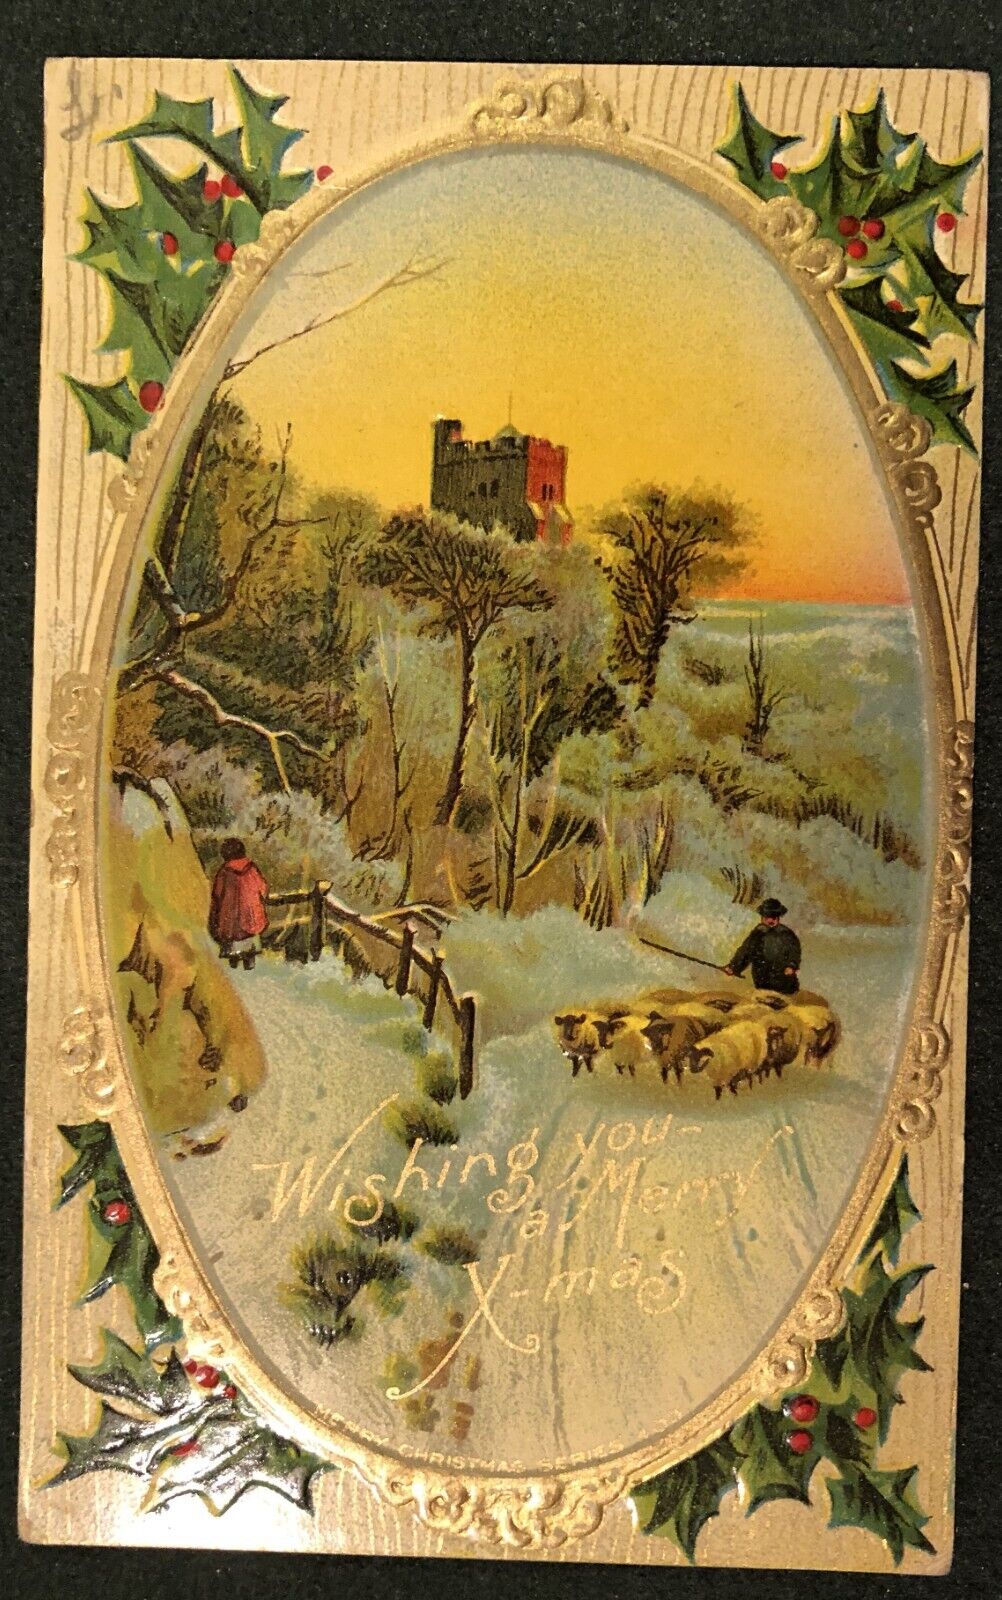 Antique Postcard Wishing You a Merry Christmas Greetings Emboss Silver Gilding,